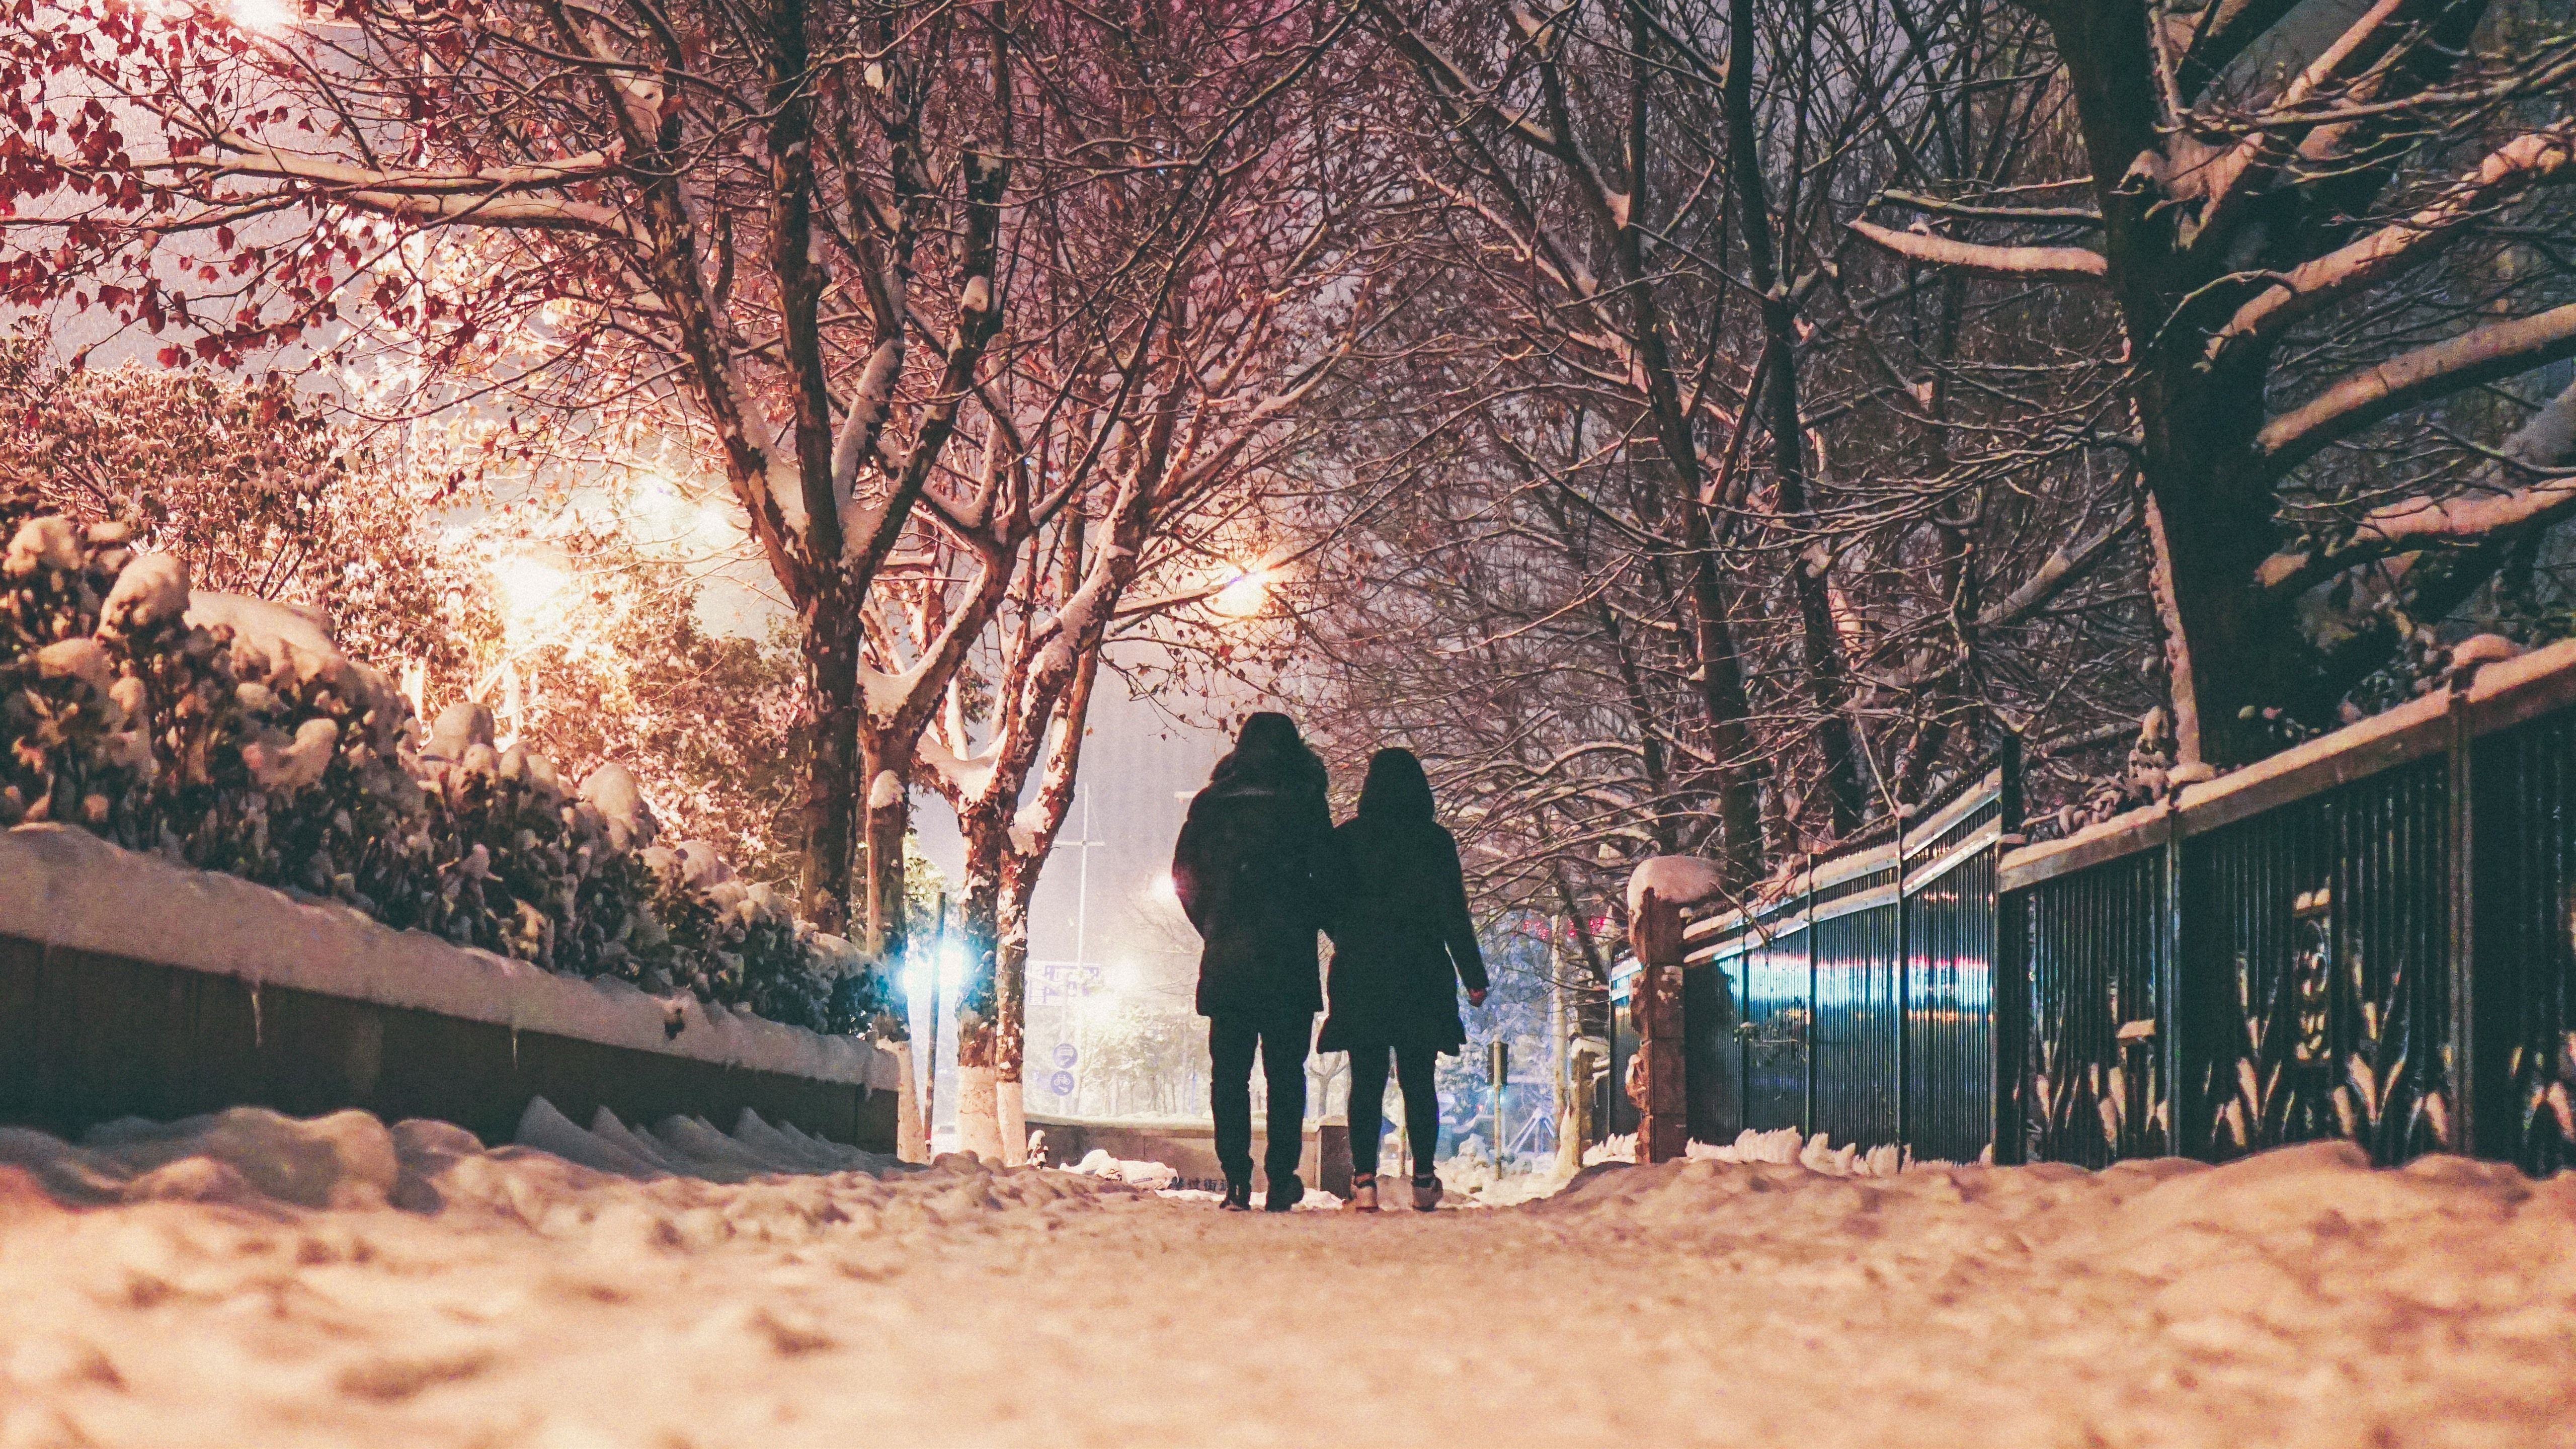 Wallpaper Winter, night, snow, trees, couple, rear view, lights, city 5120x2880 UHD 5K Picture, Image